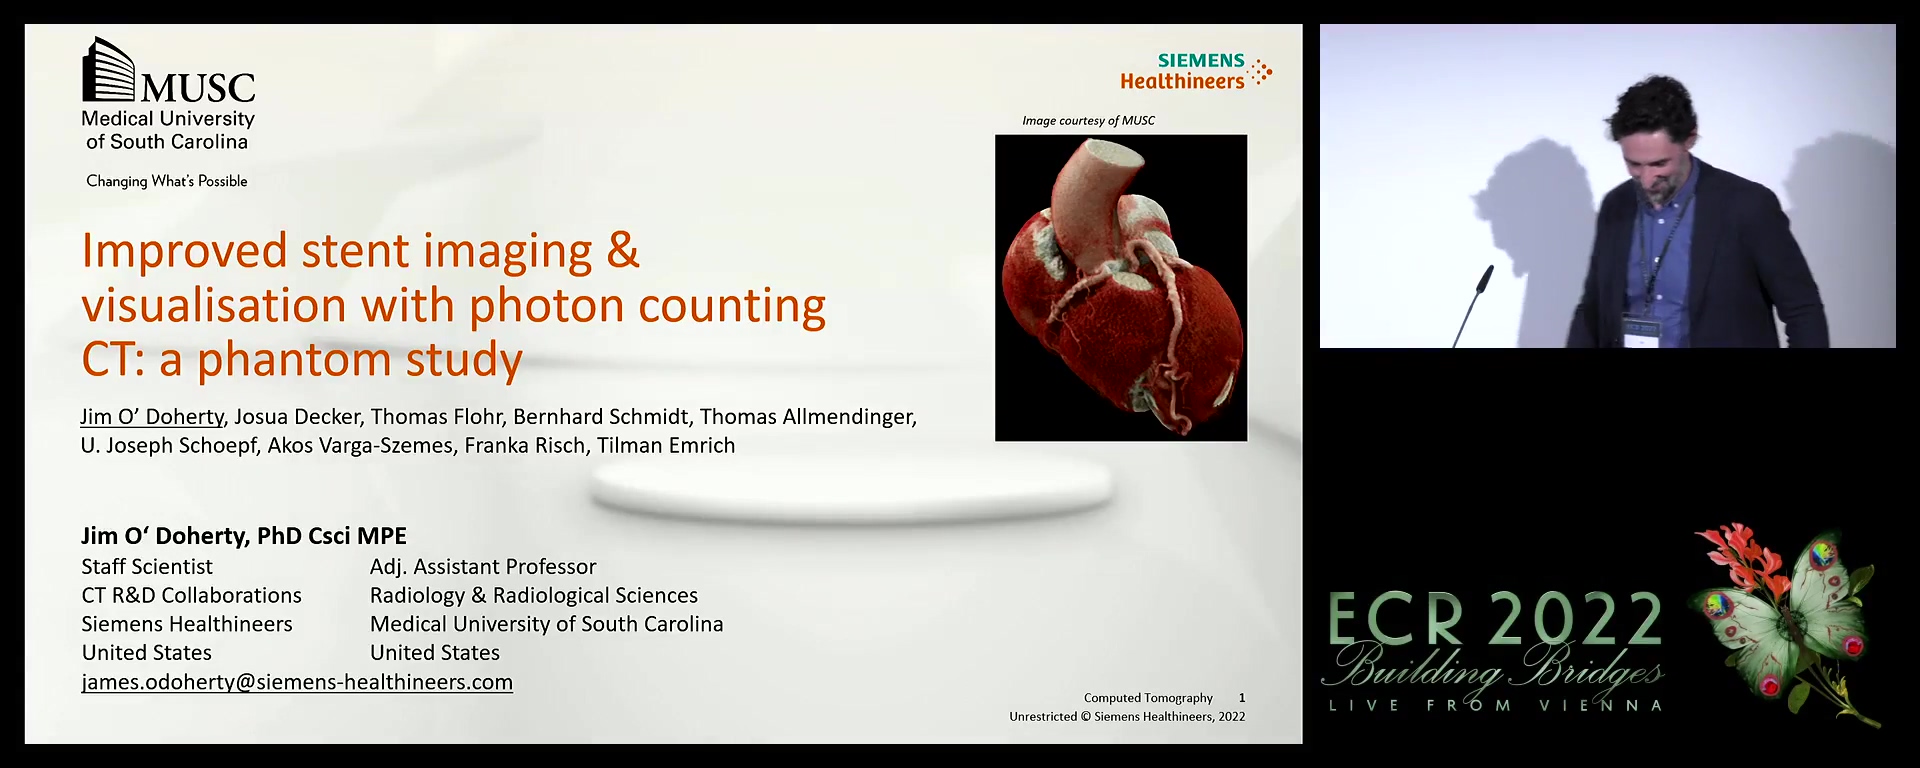 Improved stent imaging & visualisation with photon counting CT: a phantom study - Jim O Doherty, Charleston / US